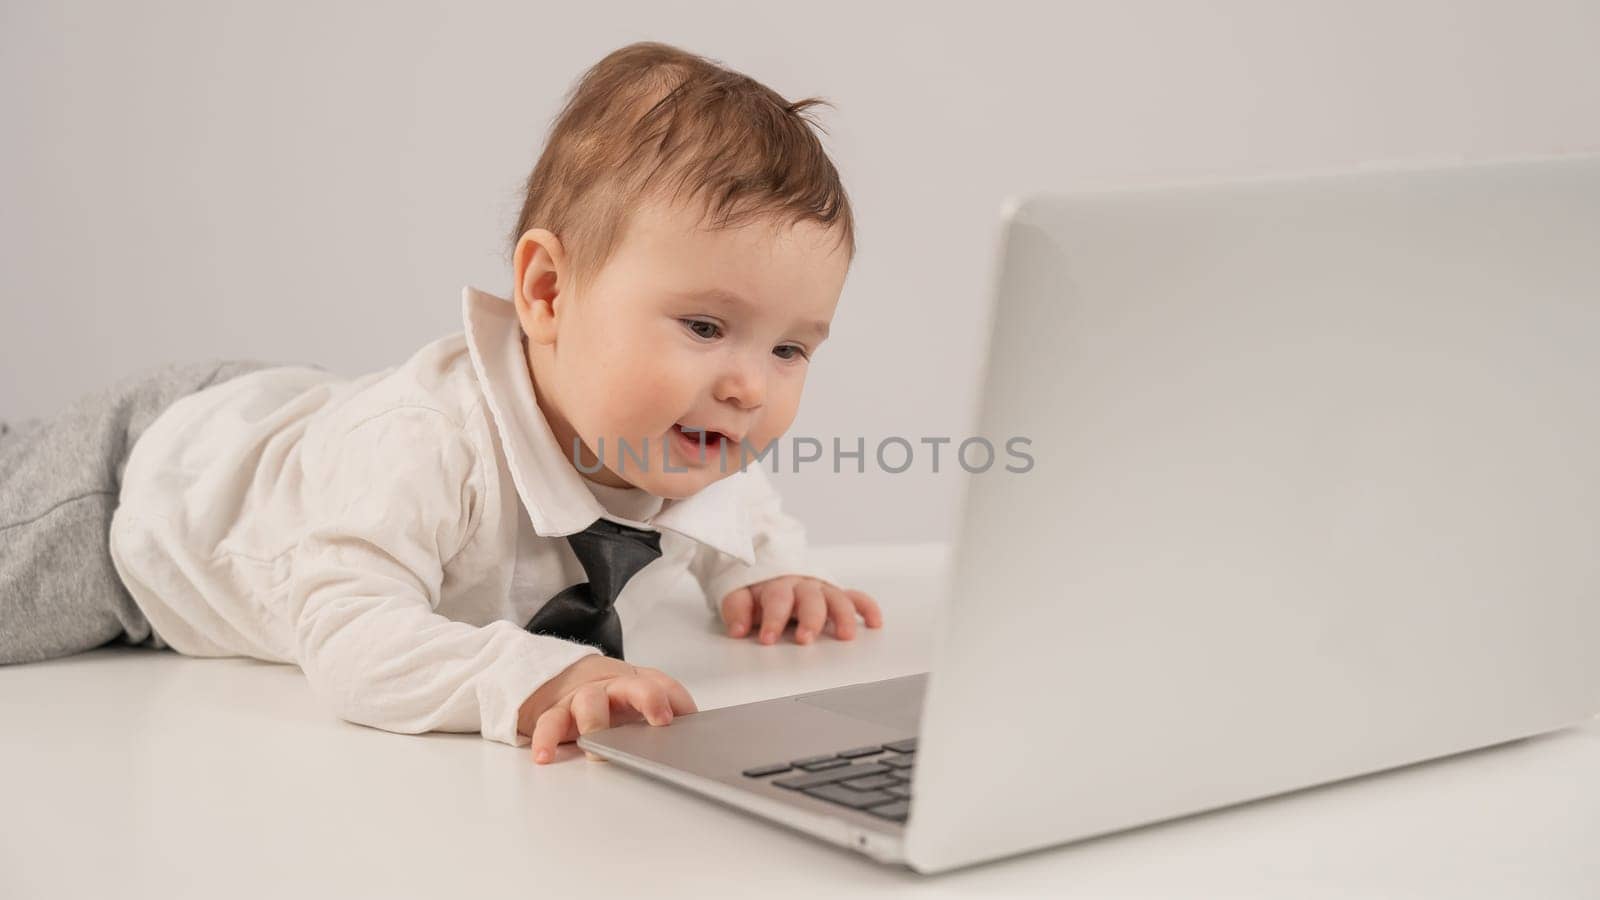 Cute baby boy in a tie working at a laptop. by mrwed54